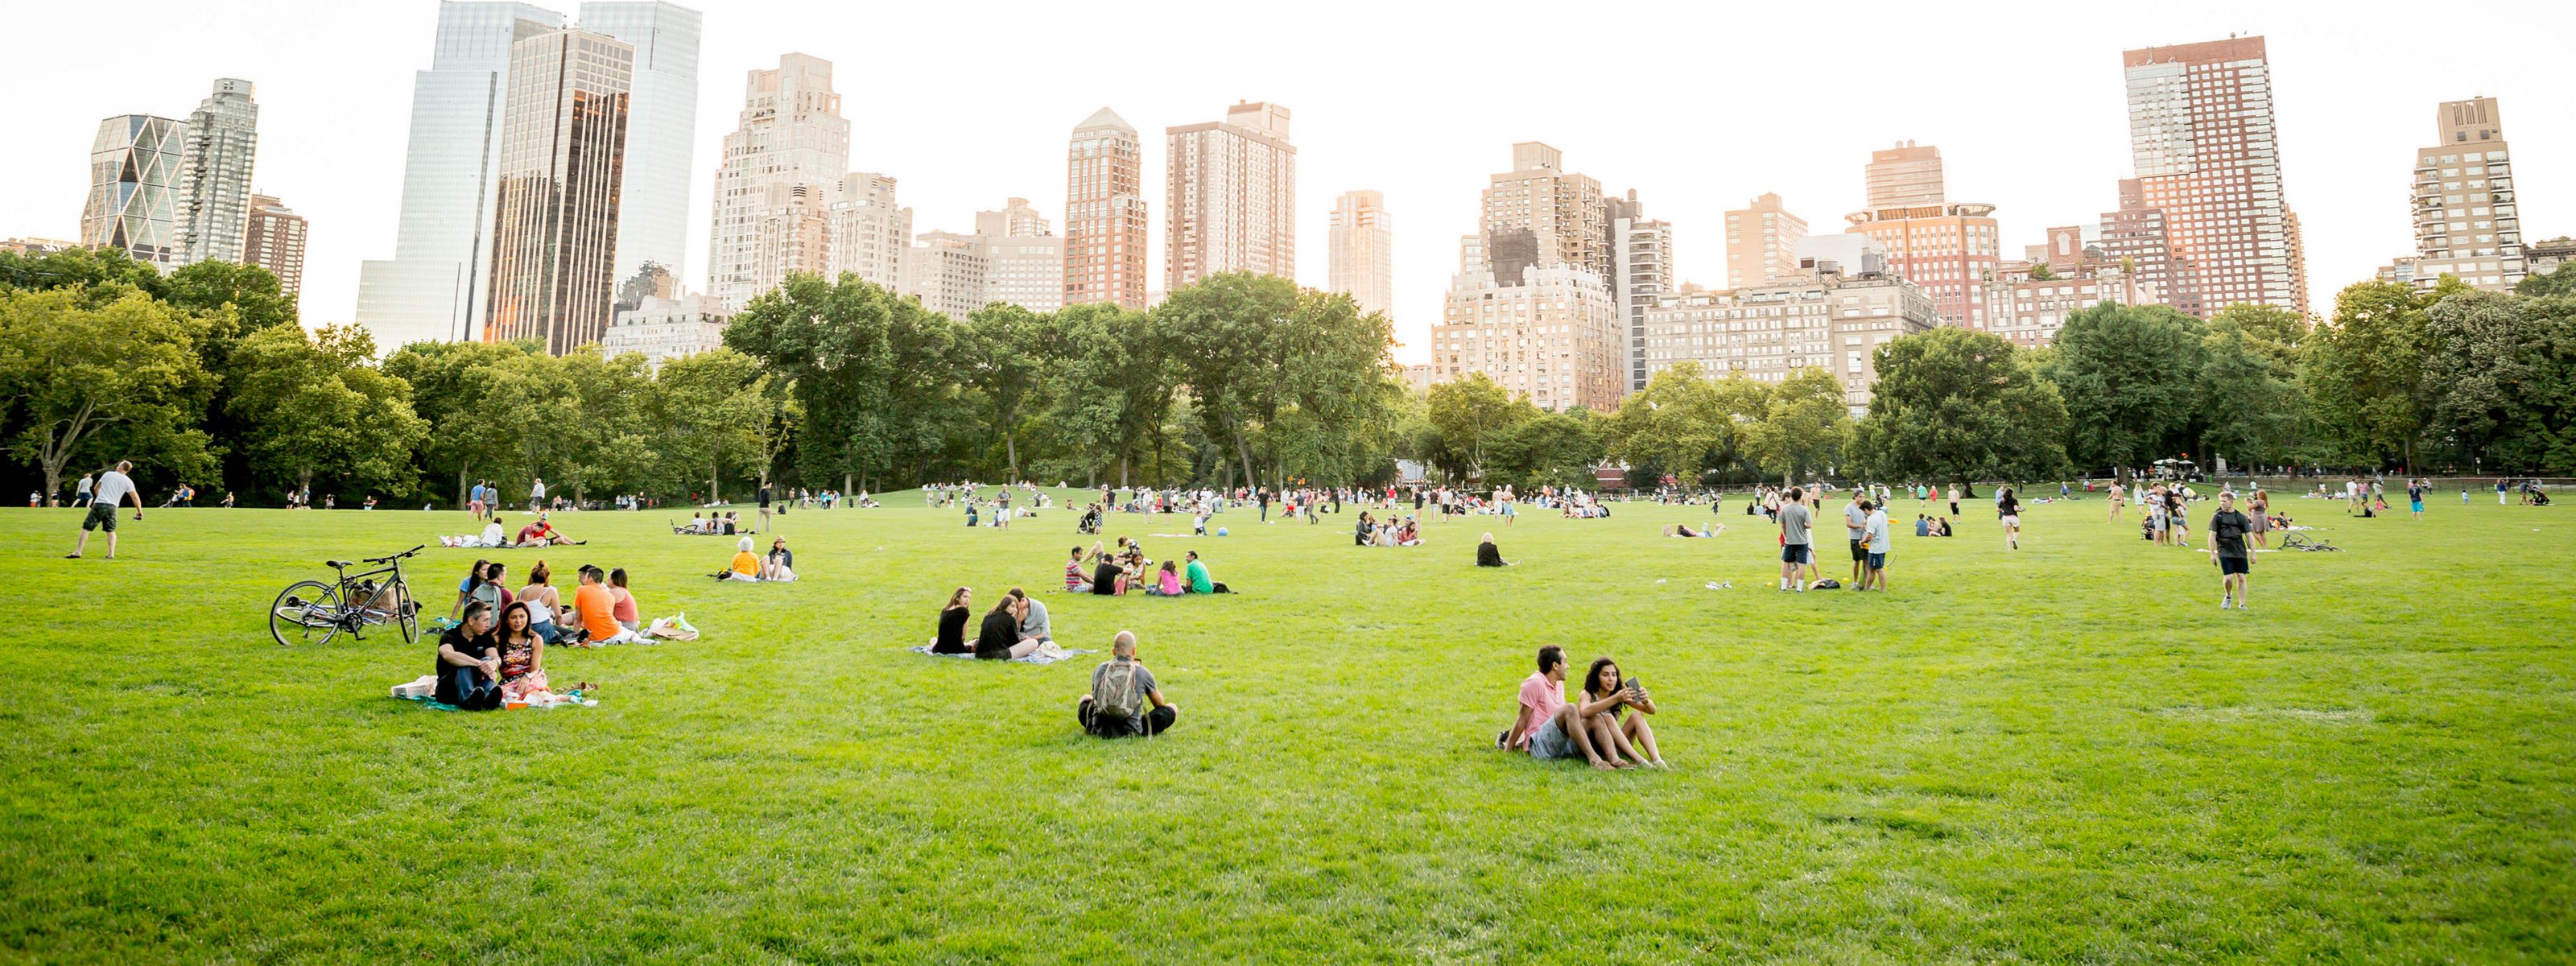 New York City skyline viewed from Central Park, where many people enjoy an open grassy field in the foreground.